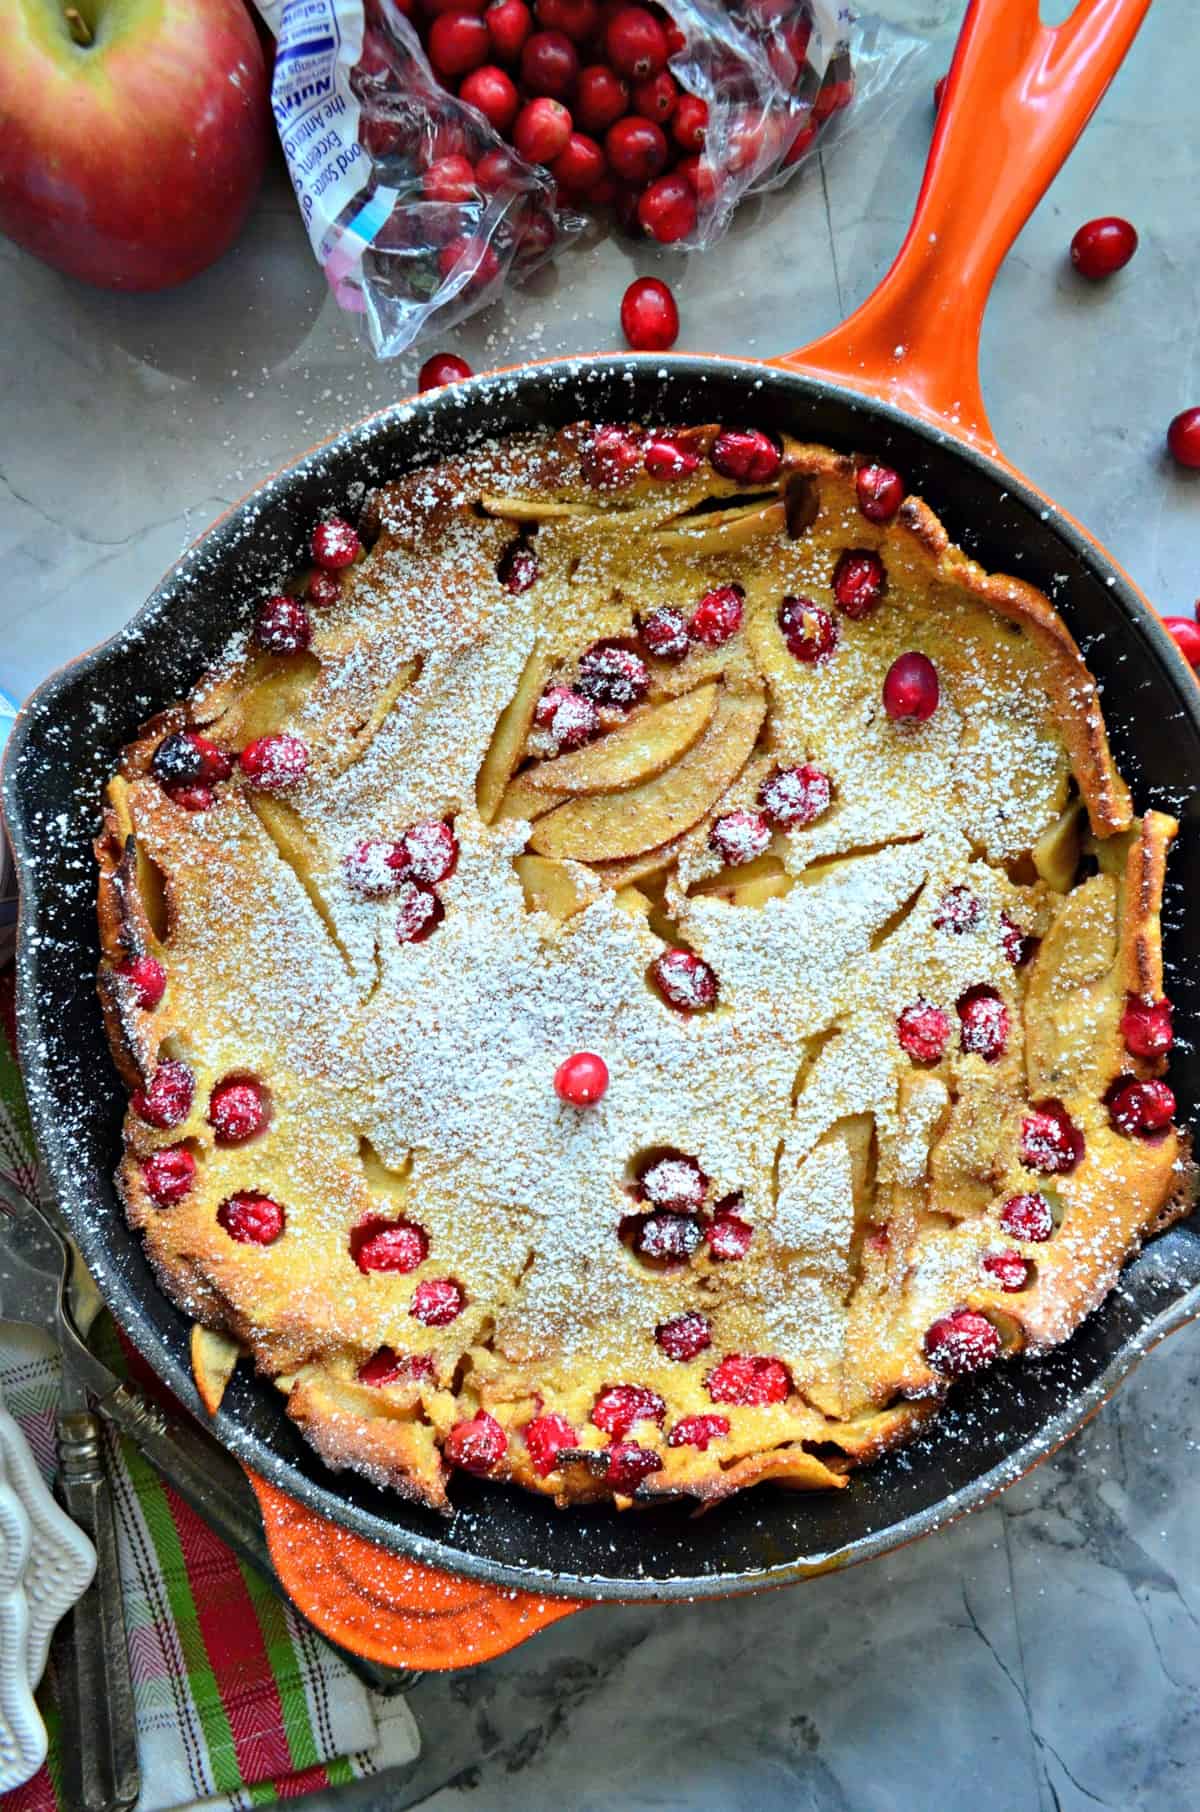 pancake-like pastry with apples and cranberries baked into it in skillet topped with powdered sugar.